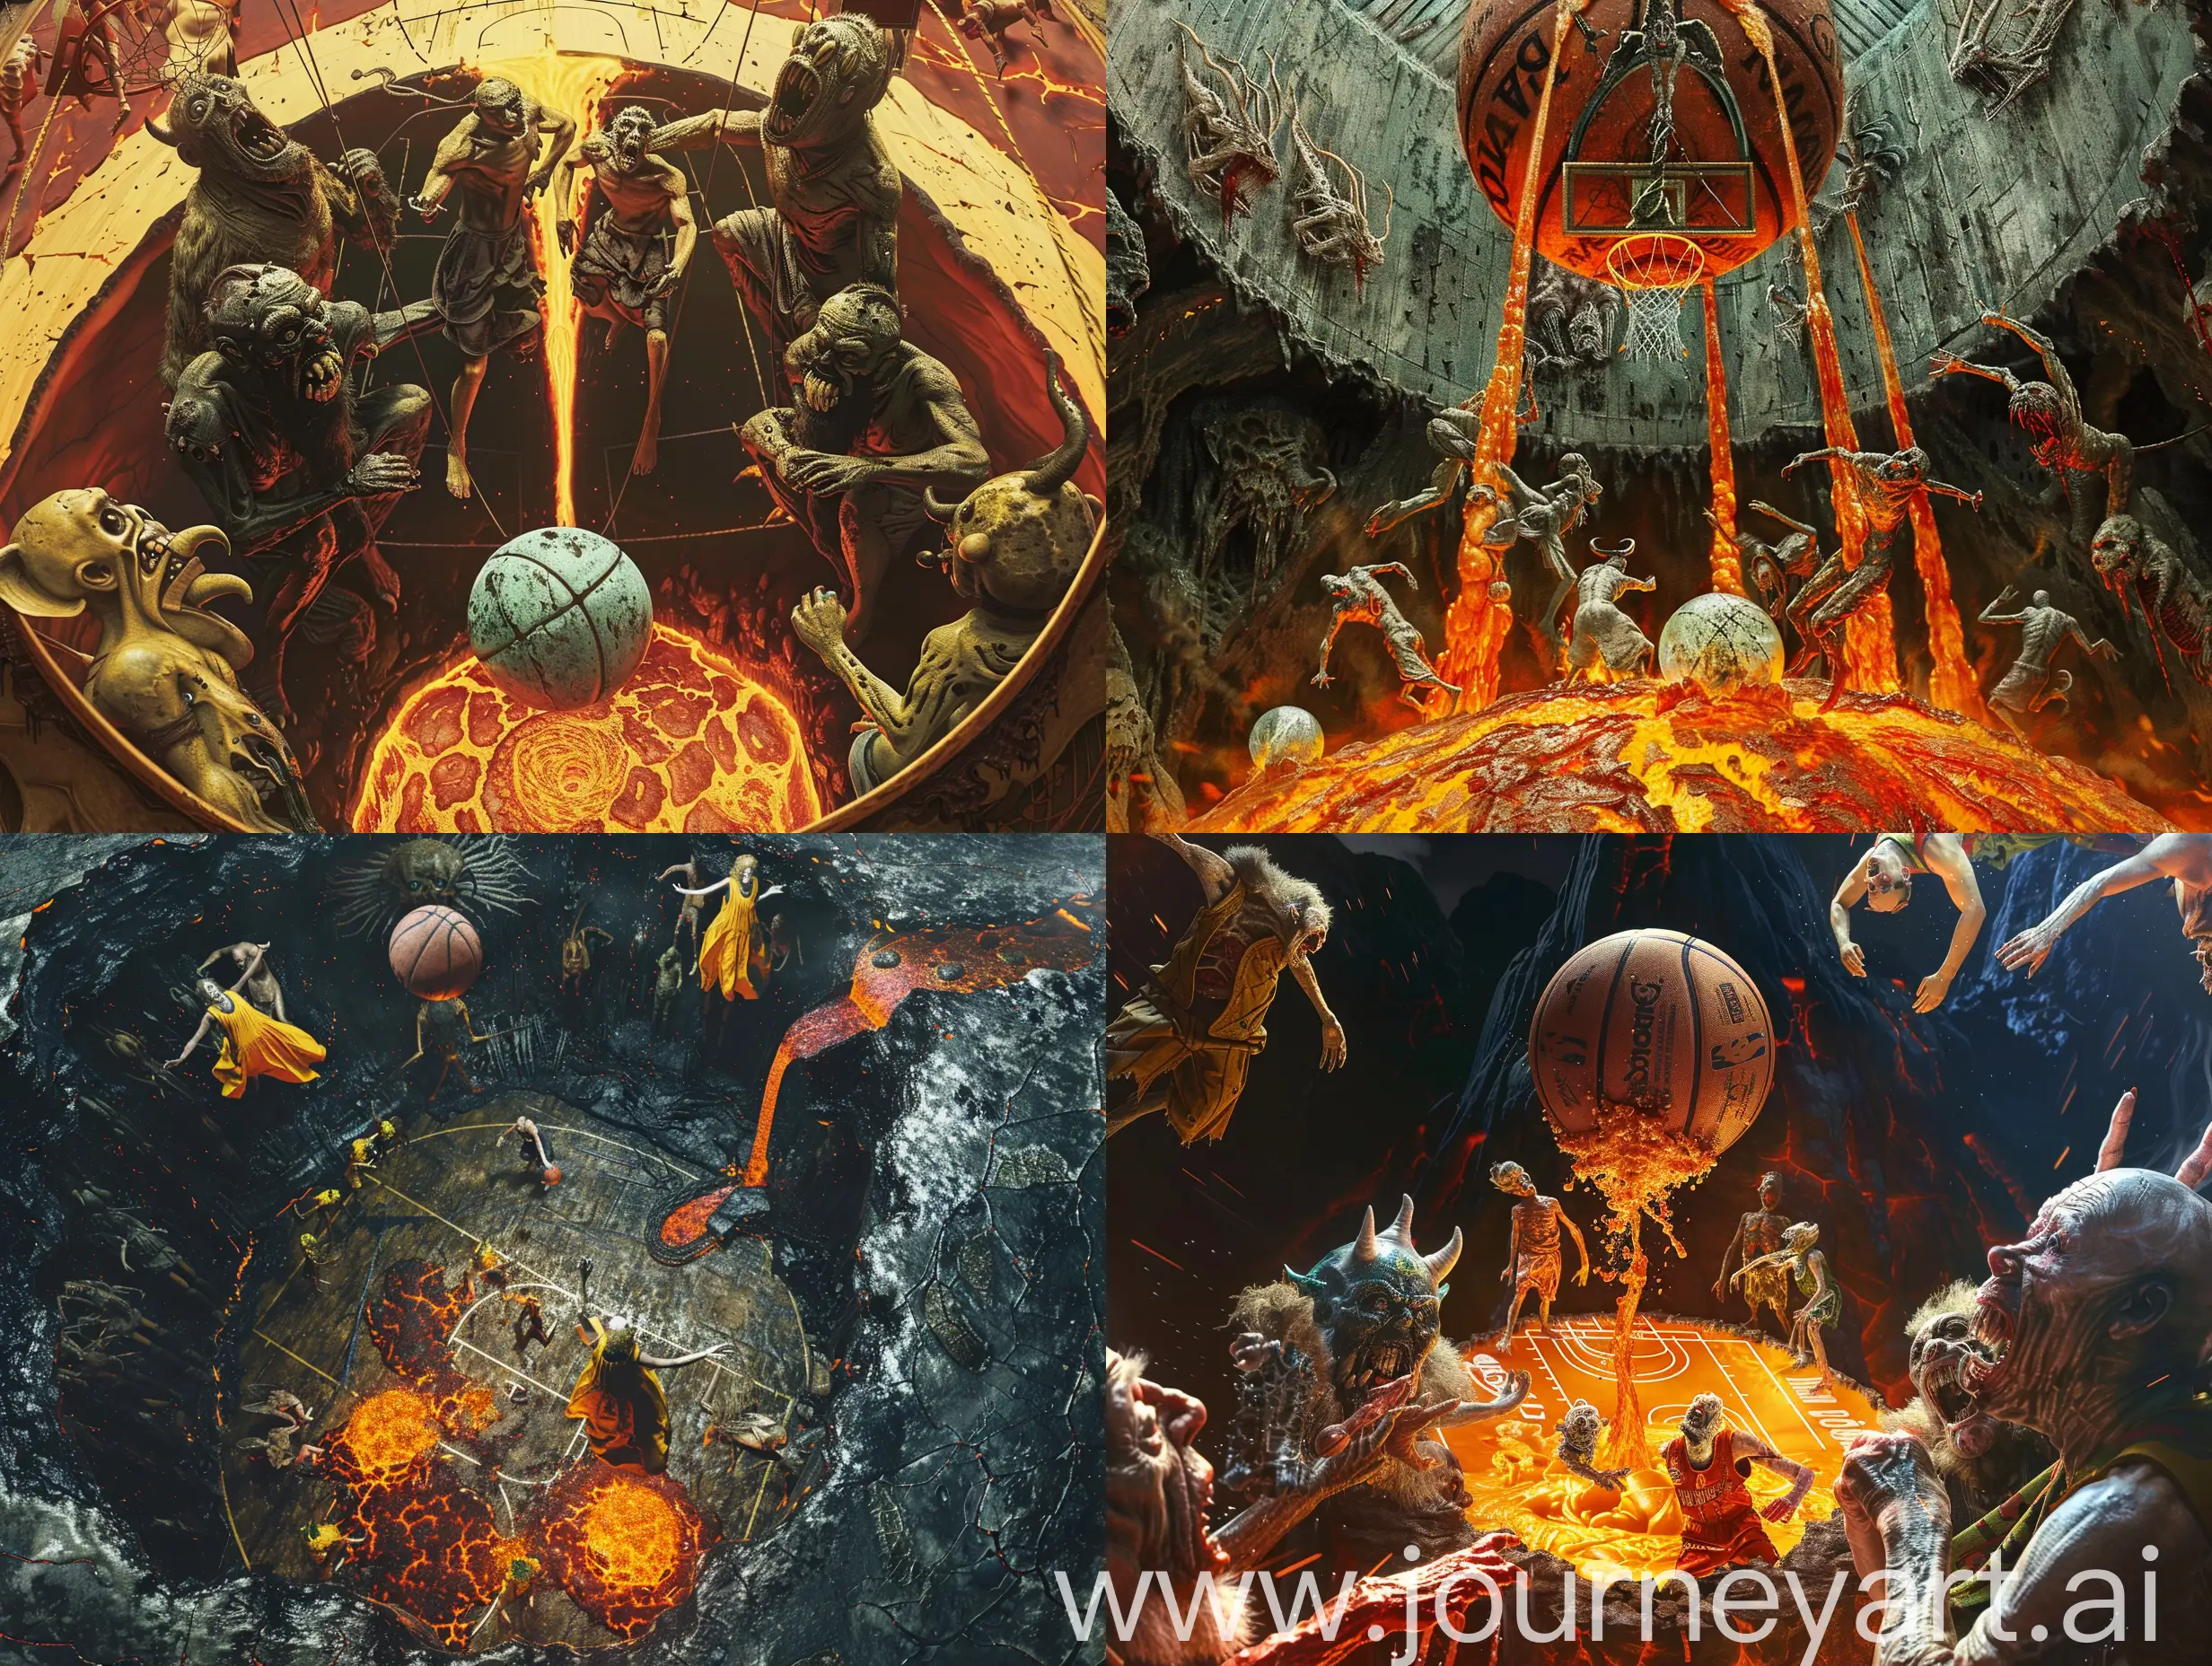 Otherworldly-Basketball-Frozen-Globes-and-Boschs-Monsters-in-Gothic-Hyperrealism